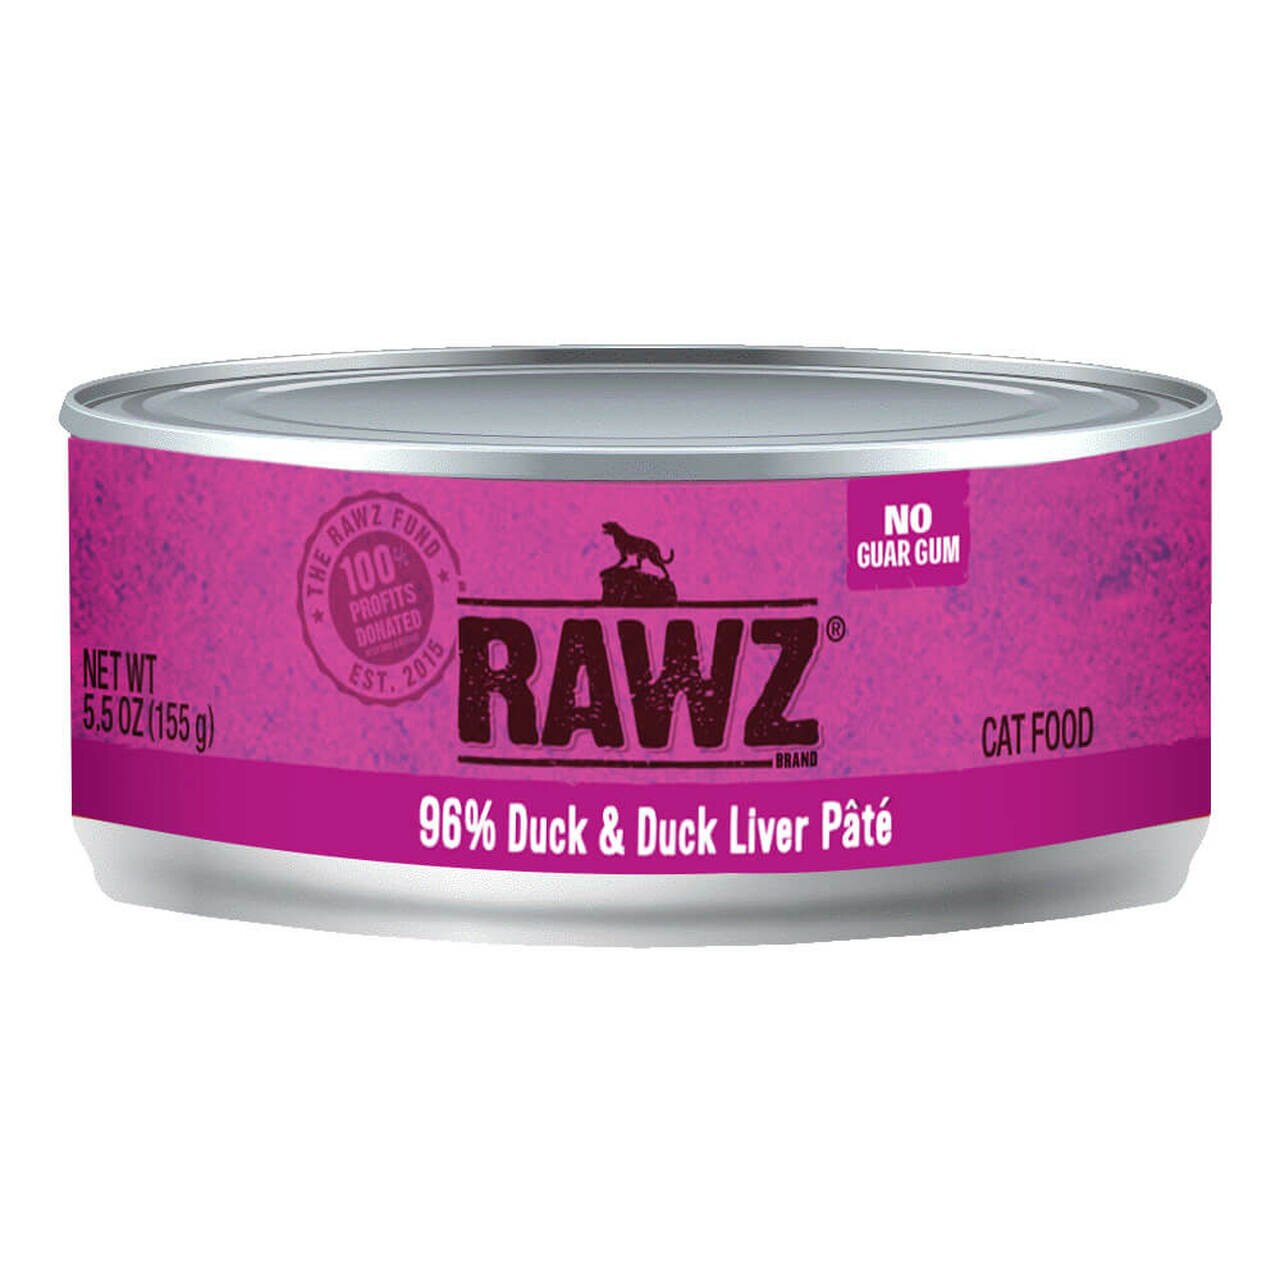 RAWZ 96% Duck & Duck Liver Pate Canned Cat Food 24-Pack 5.5oz - Click Image to Close